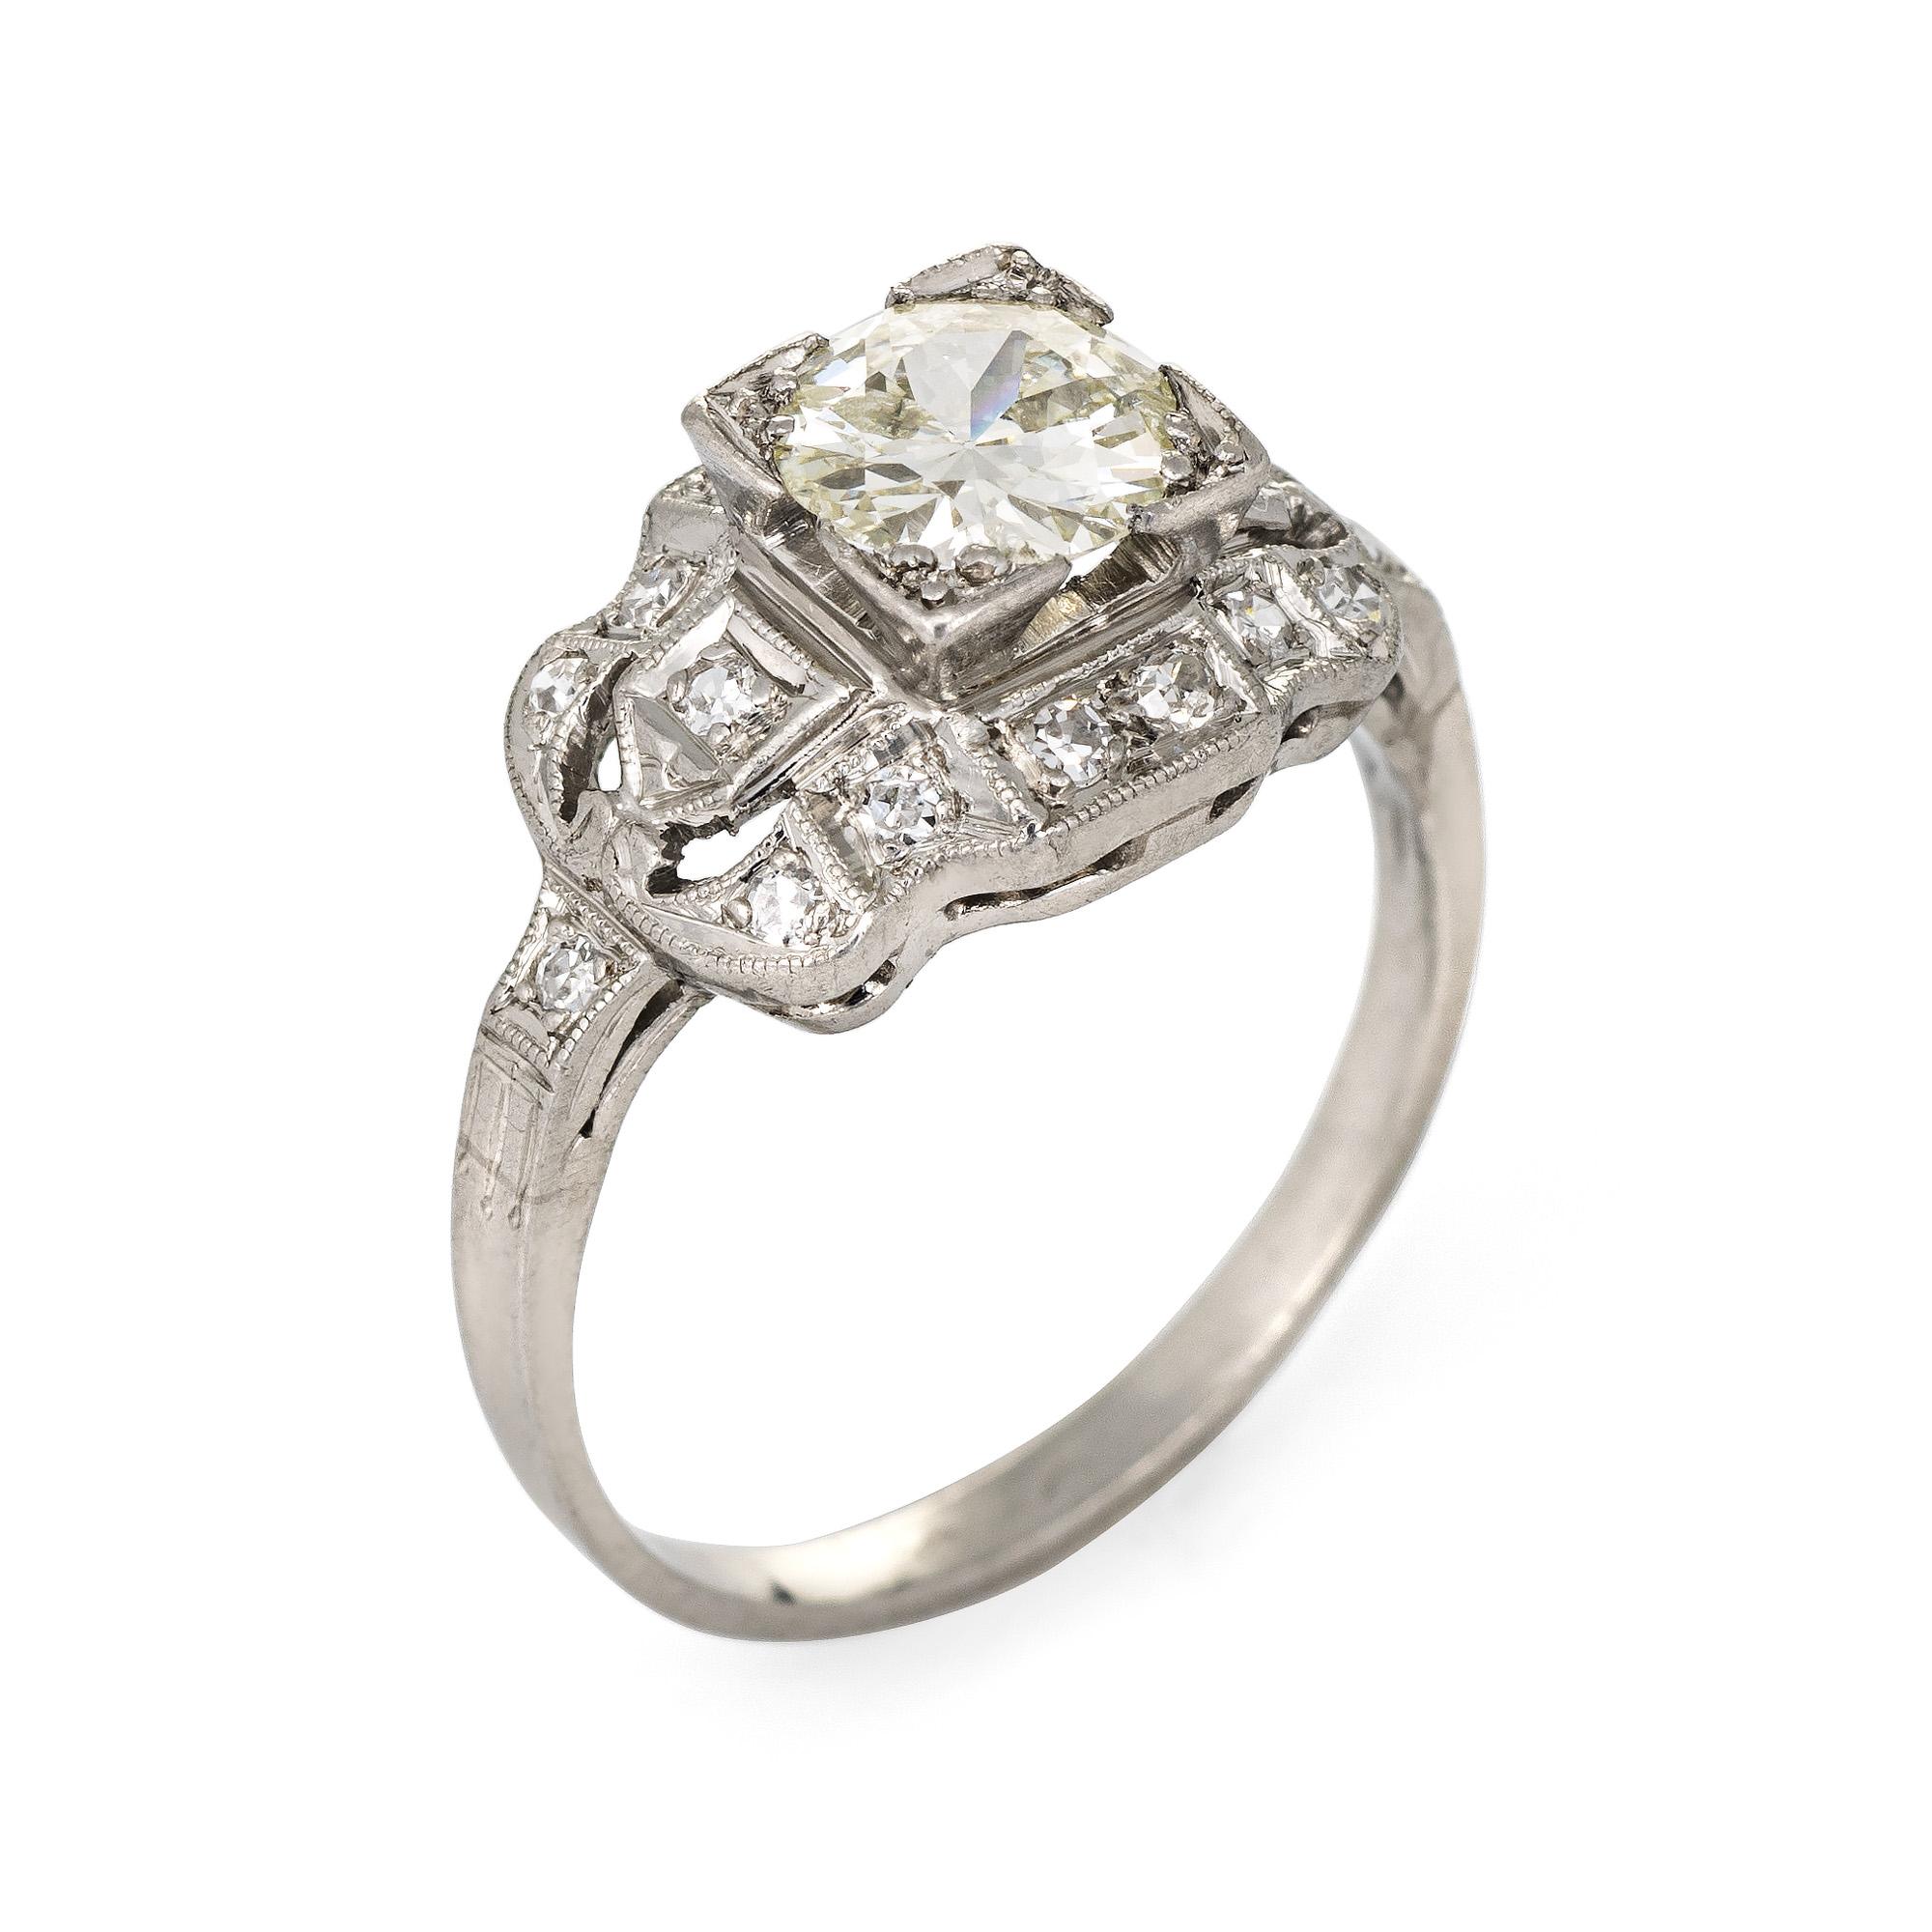 Finely detailed vintage Art Deco era diamond engagement ring (circa 1920s to 1930s) crafted 900 platinum. 

Centrally mounted estimated 0.85 carat old European cut diamond is estimated at I-J color and SI2 clarity. The side shoulders are set with an